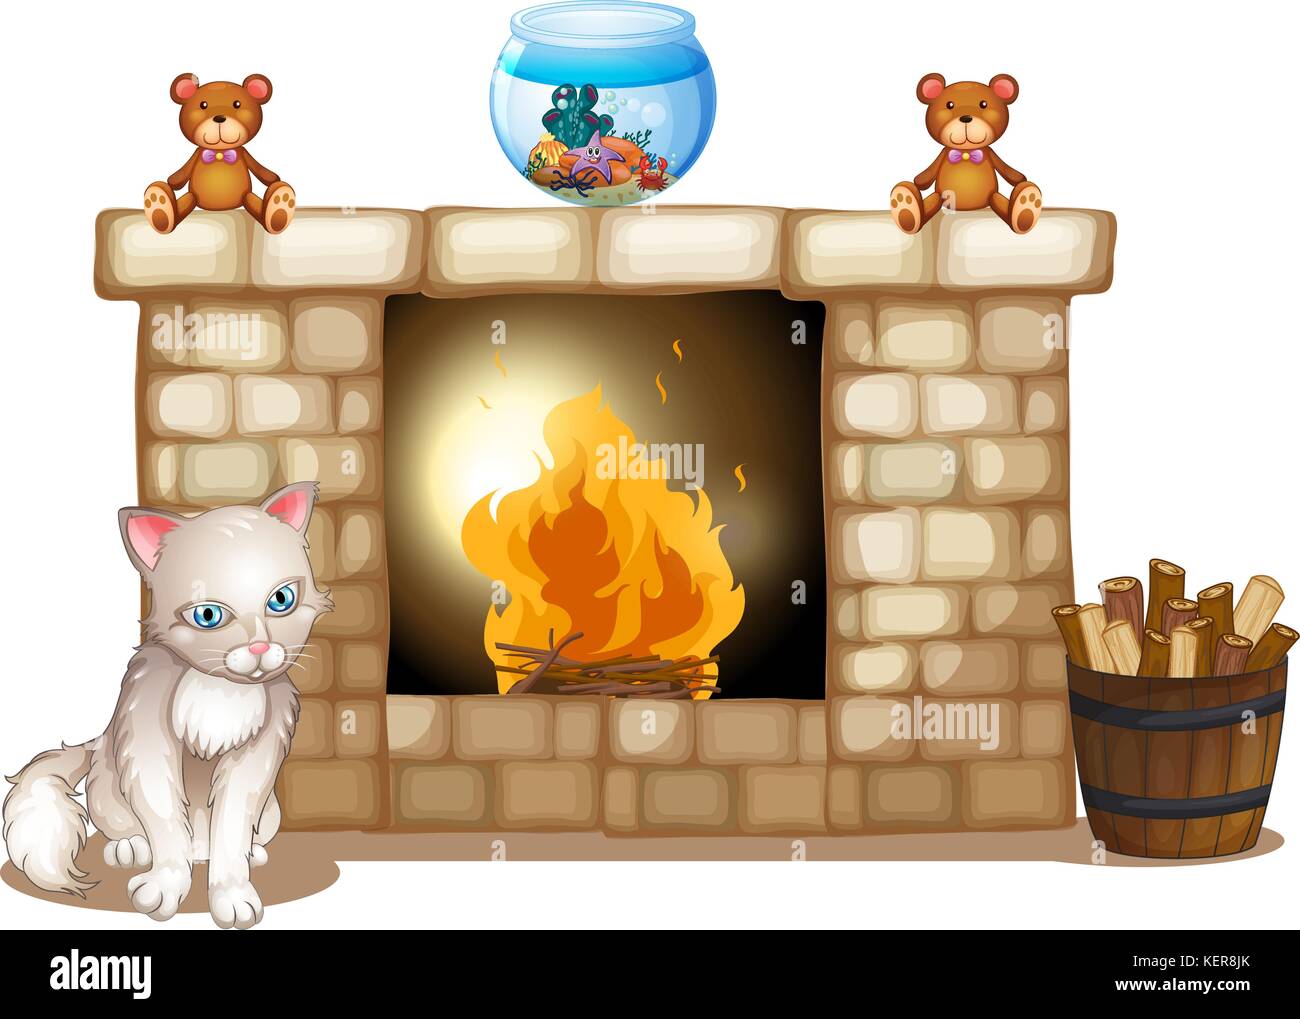 Illustration of a sad cat near the fireplace on a white background Stock Vector